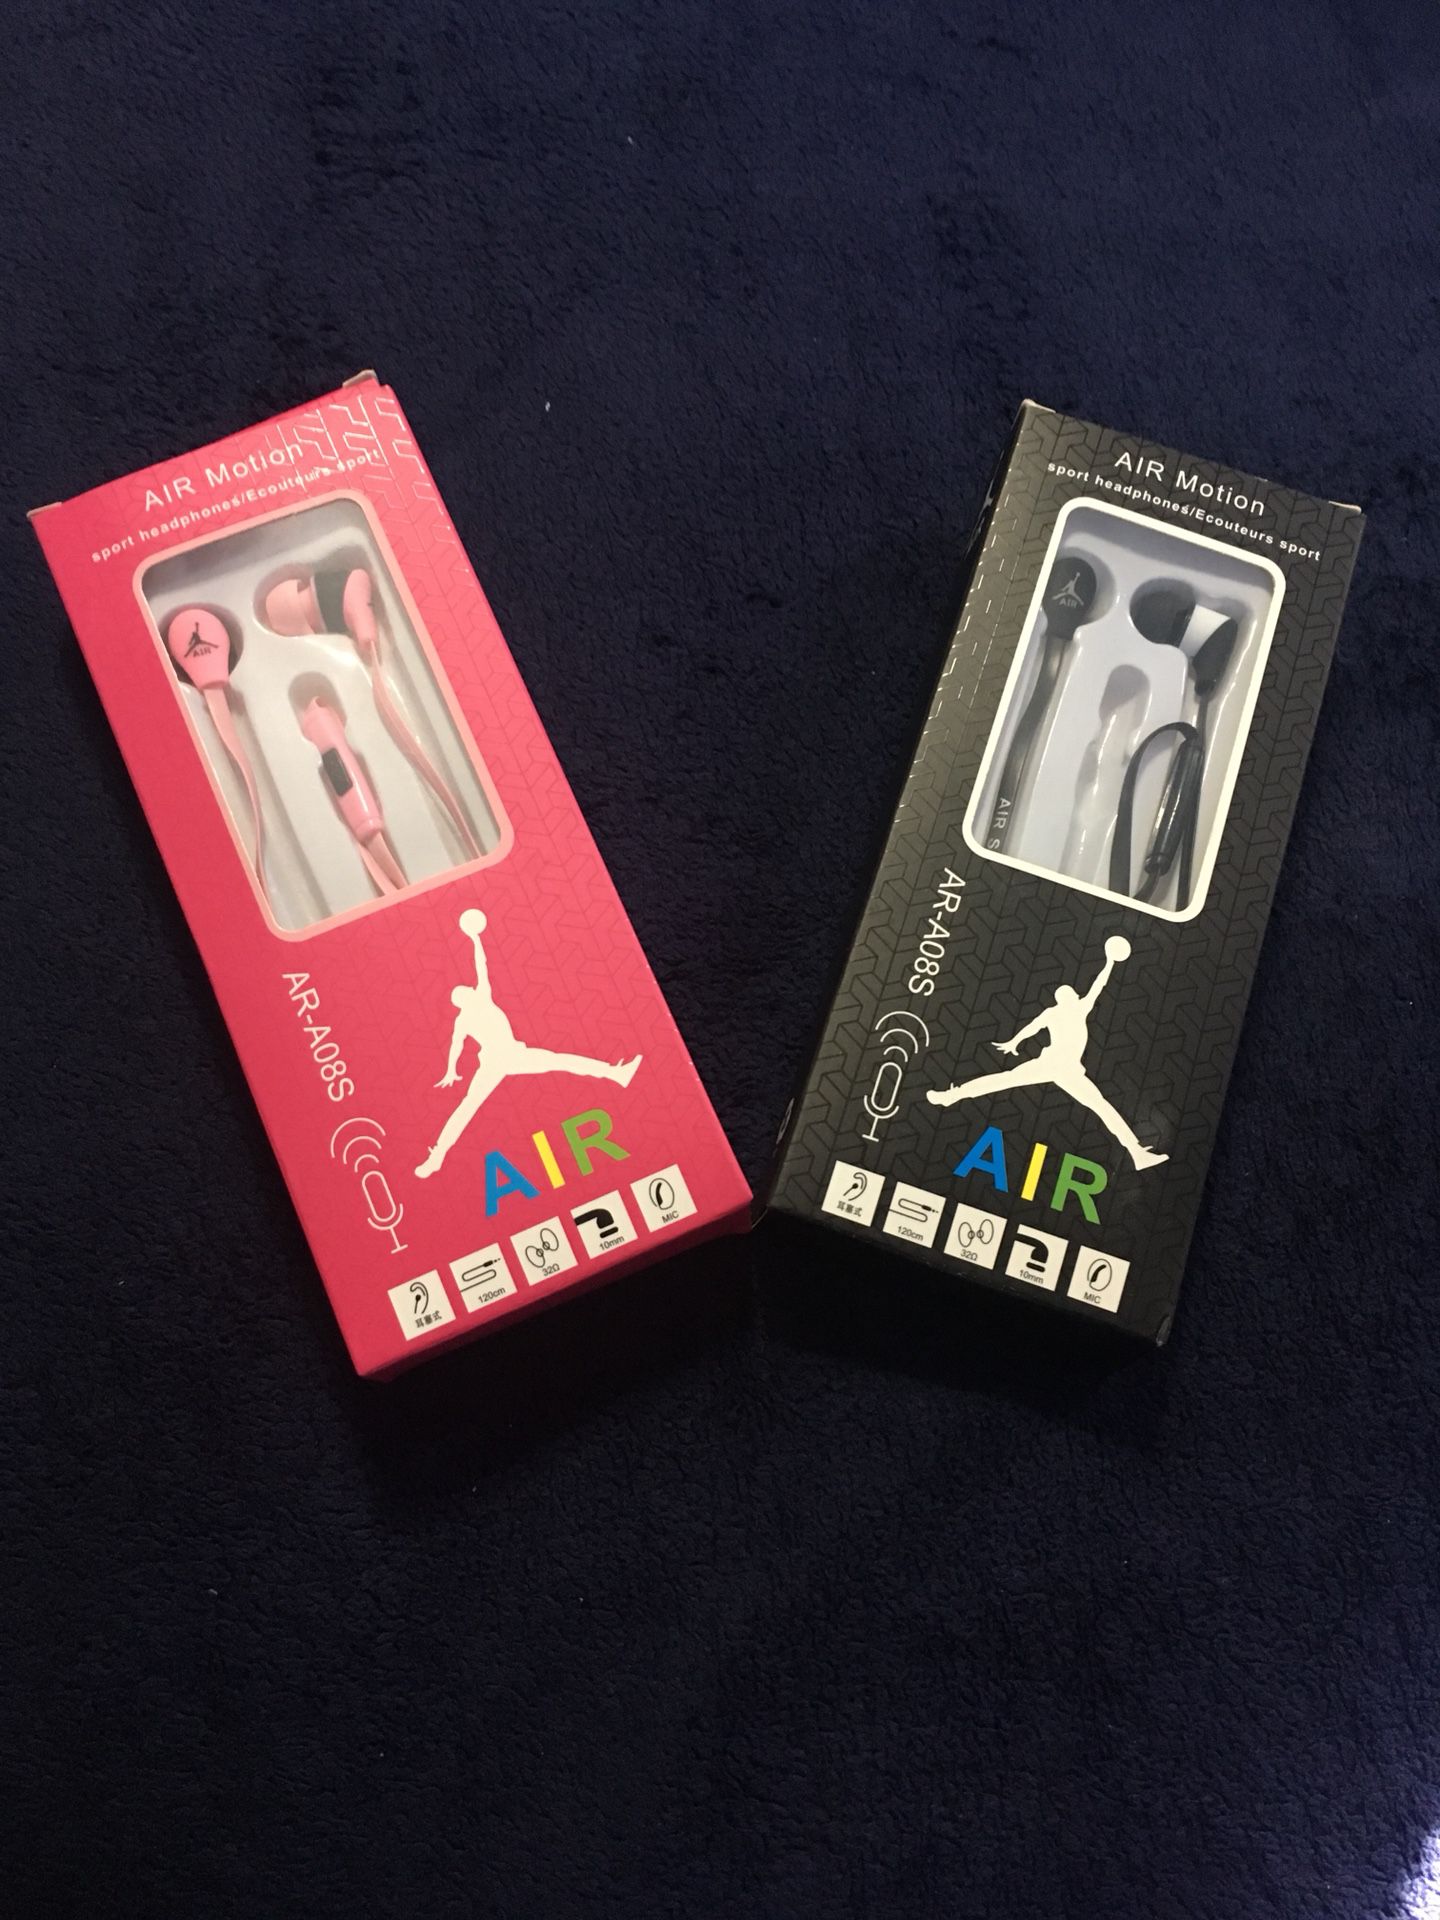 NEW AIR JORDAN EARBUDS *** GREAT CHRISTMAS GIFTS